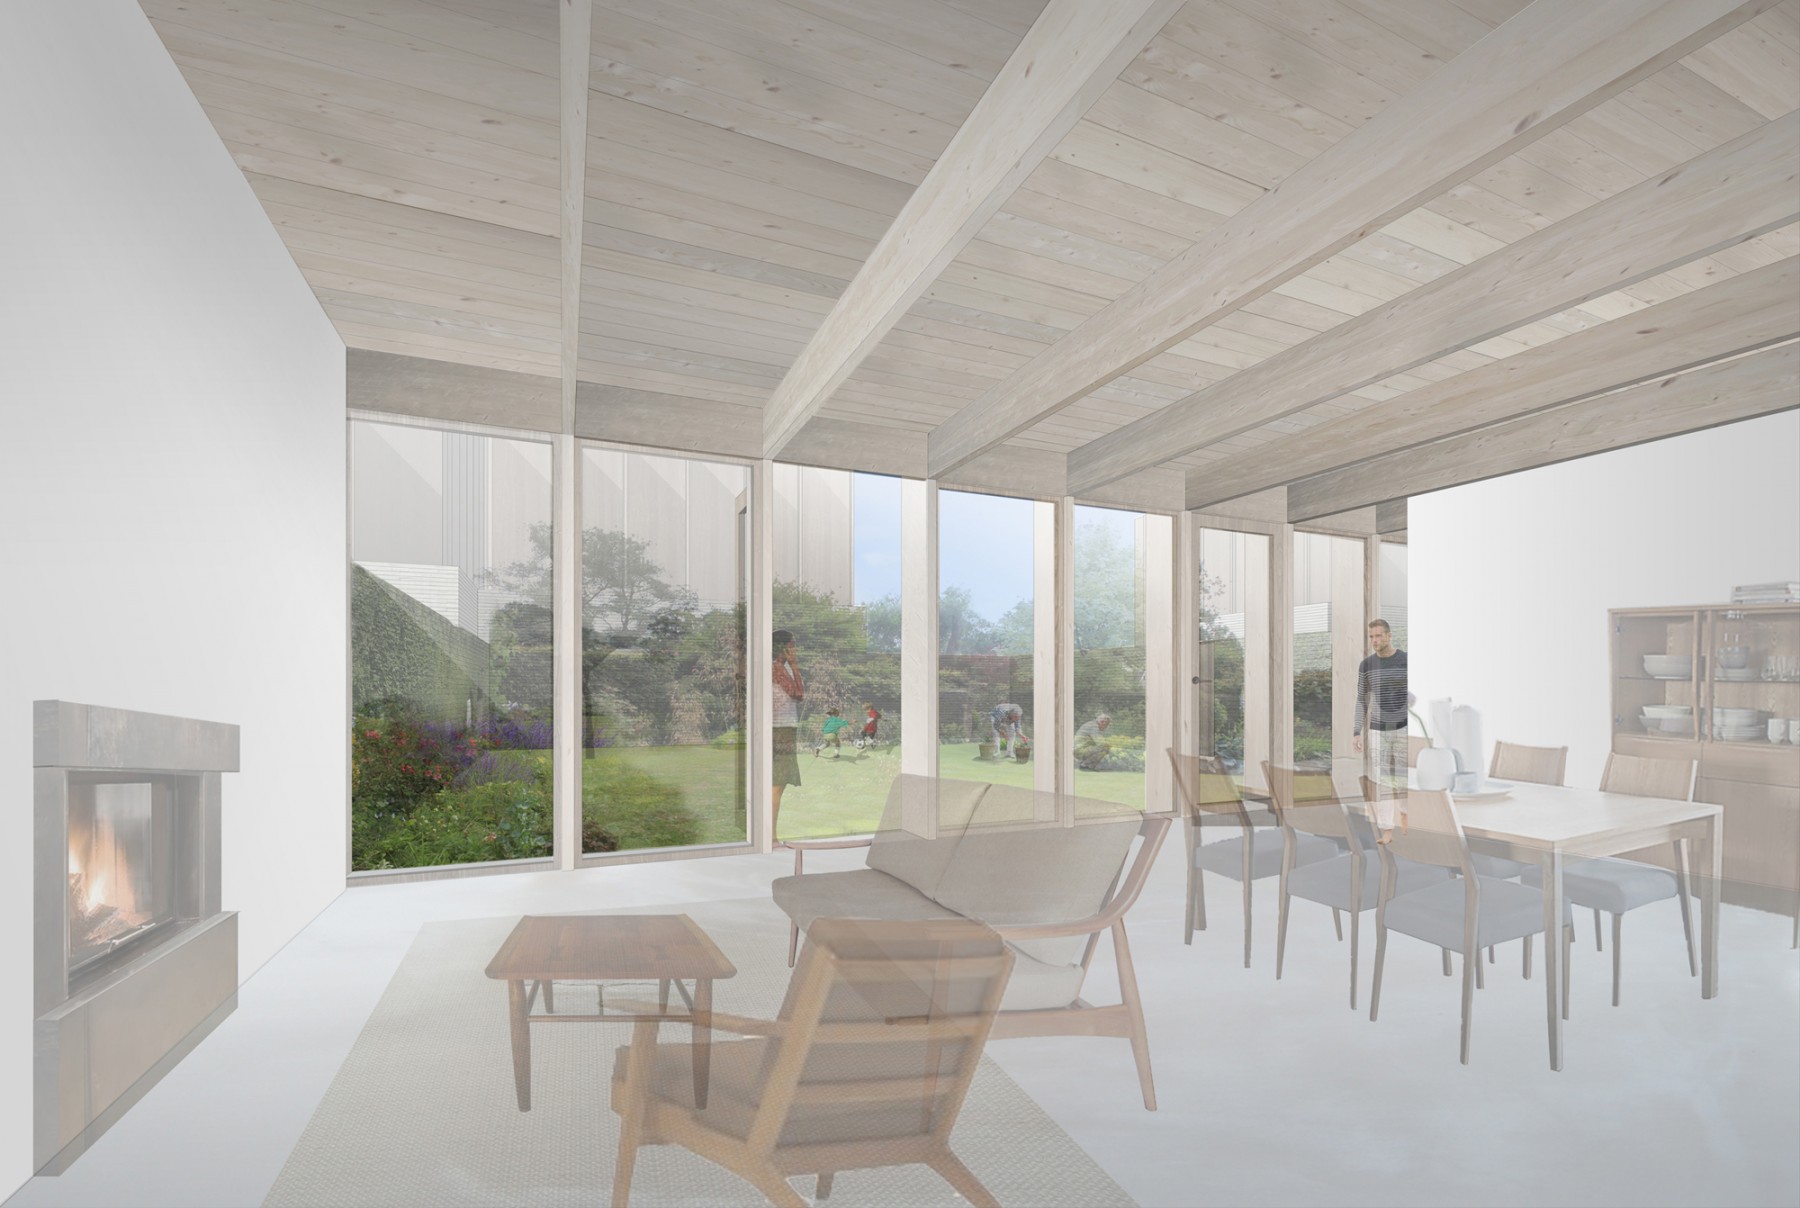 RIBA-at-home-exhibition-jamie-fobert-architects-handmade-visualisation-cottage-village-affordable-housing